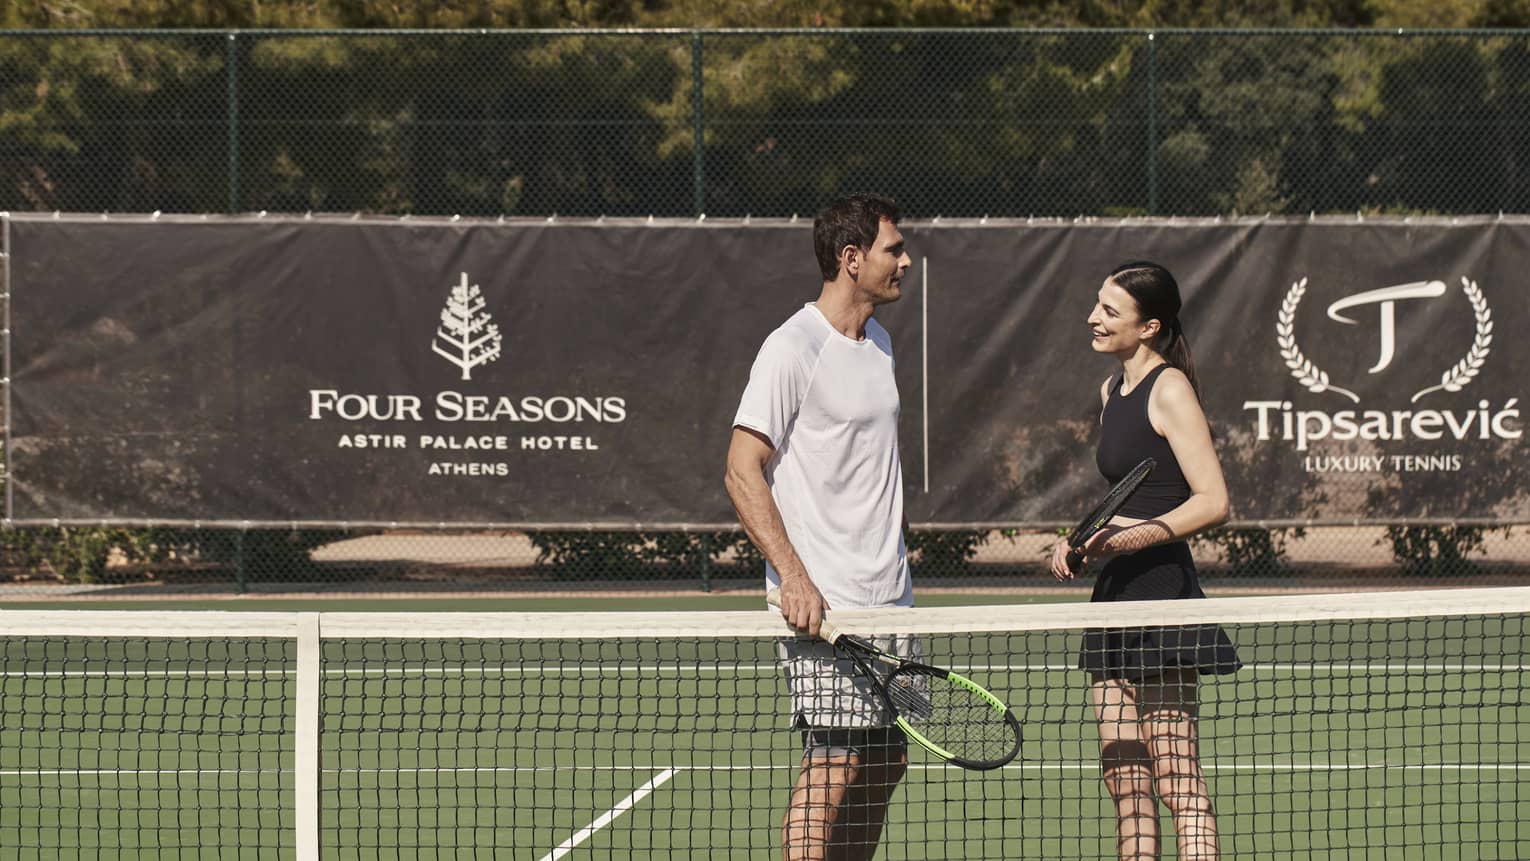 A man and woman holding tennis rackets on a court.